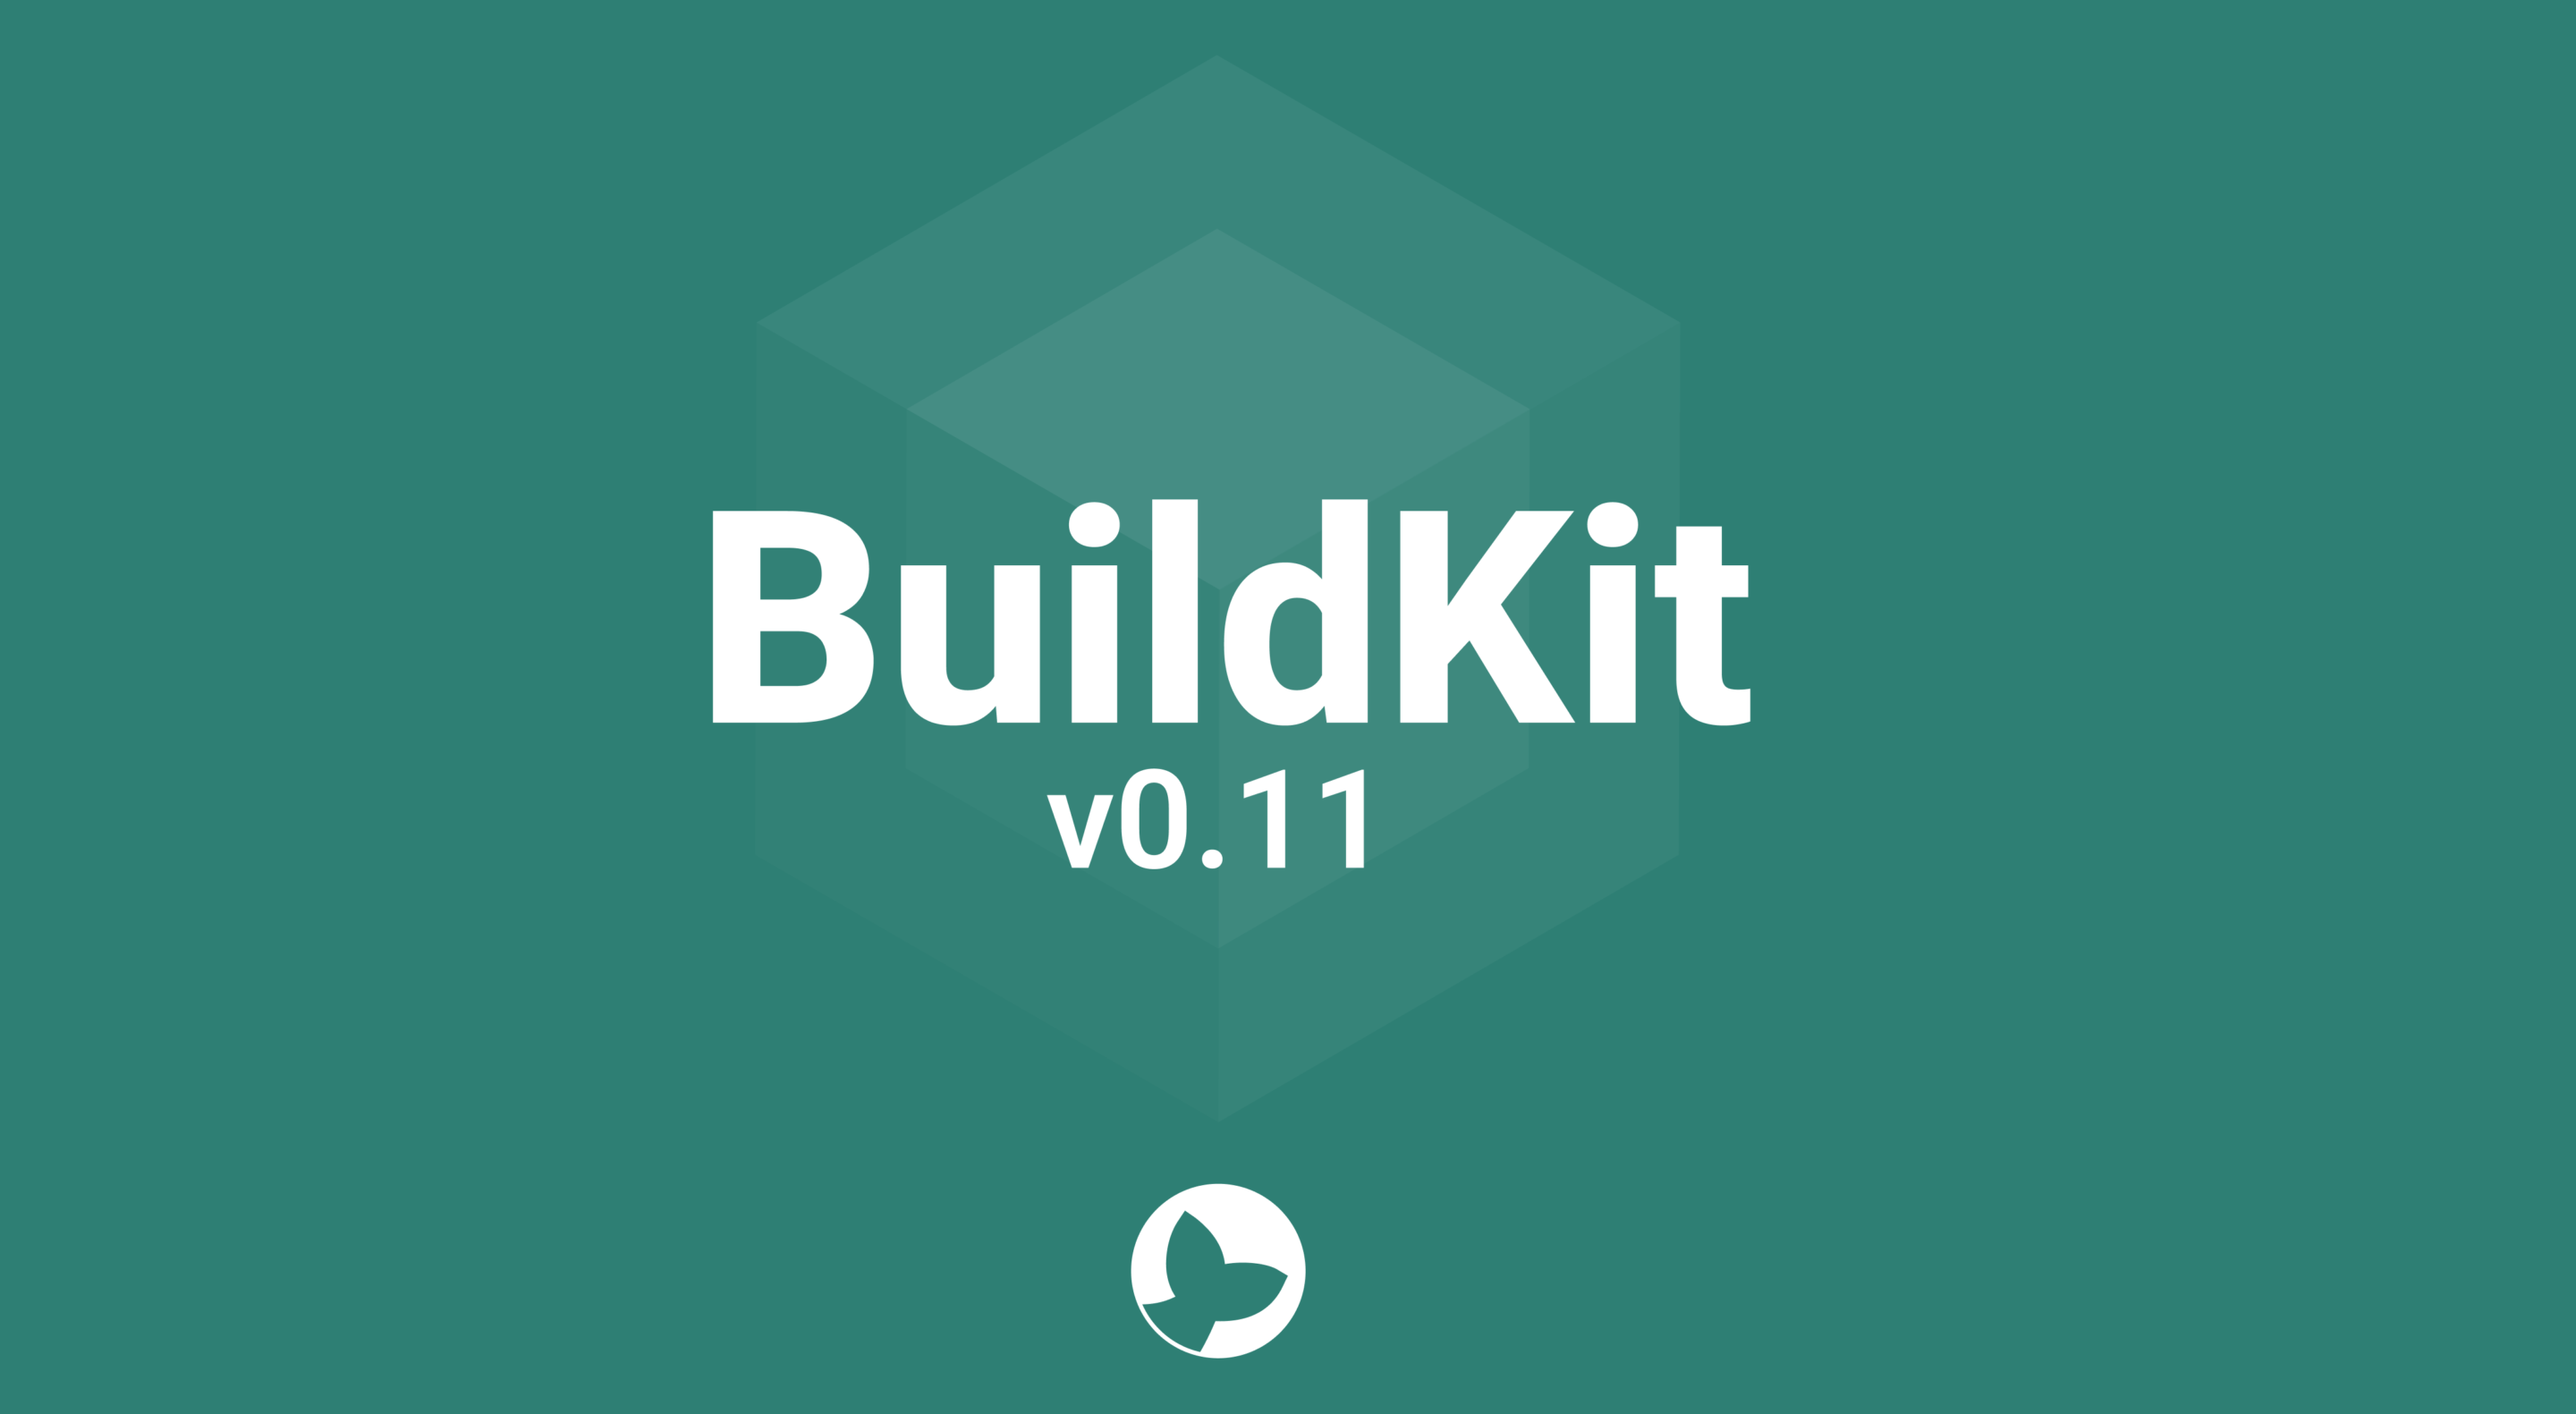 Buildkit v0. 11 now available.